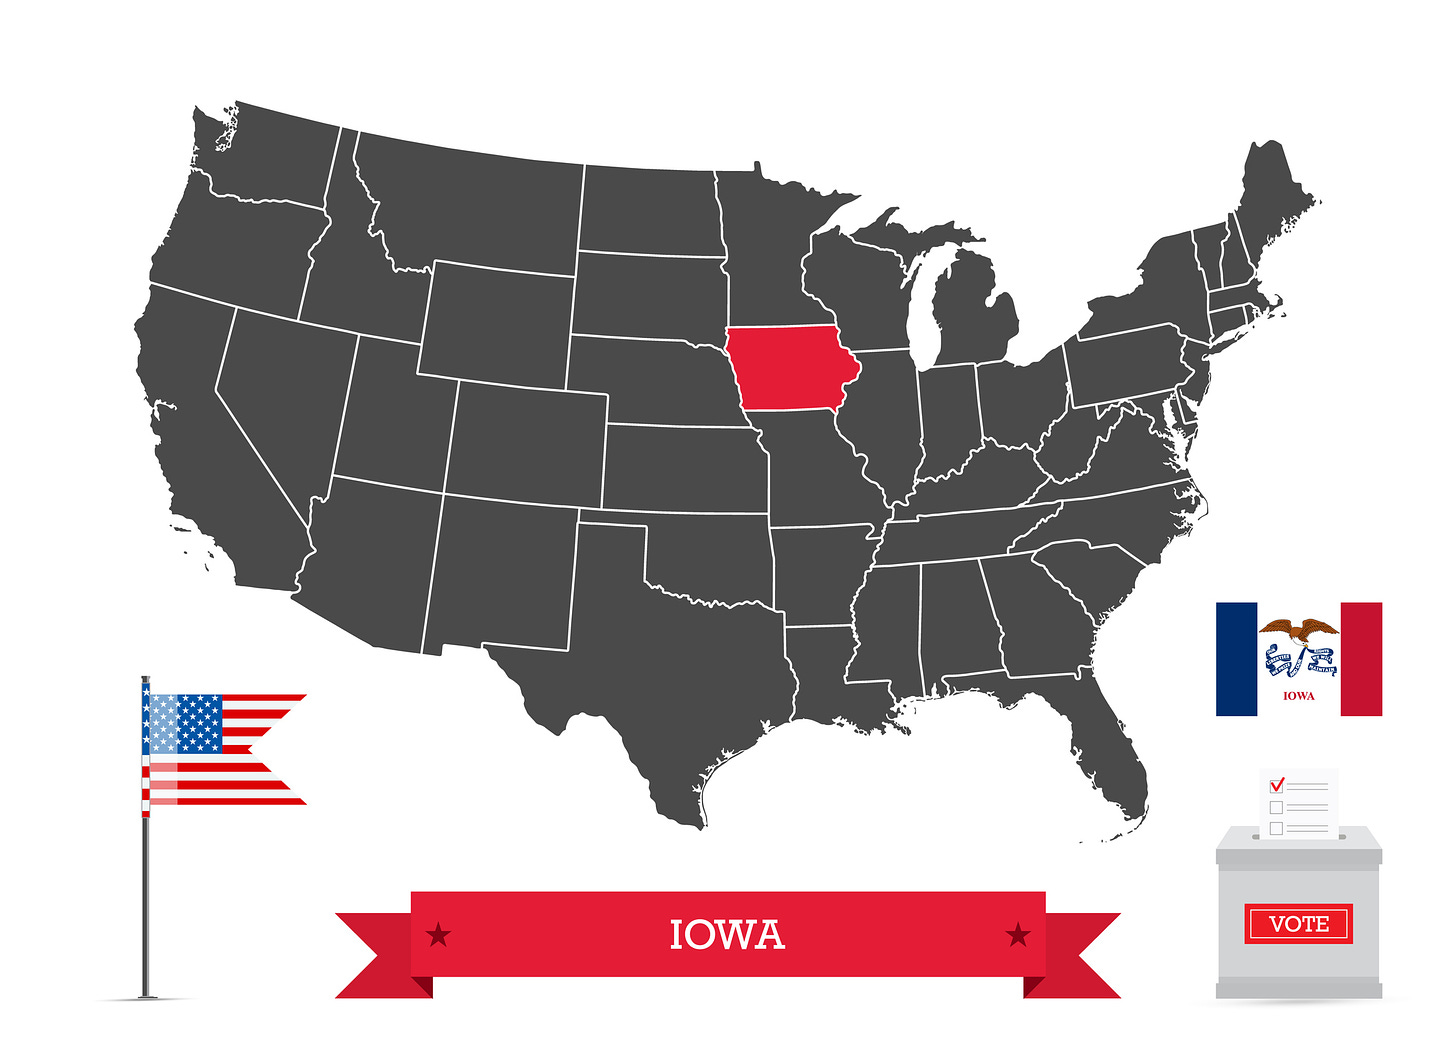 Gray image of United States map with Iowa in red with images of U.S. and Iowa flags beneath as well as a ballot box with "vote" printed on it.